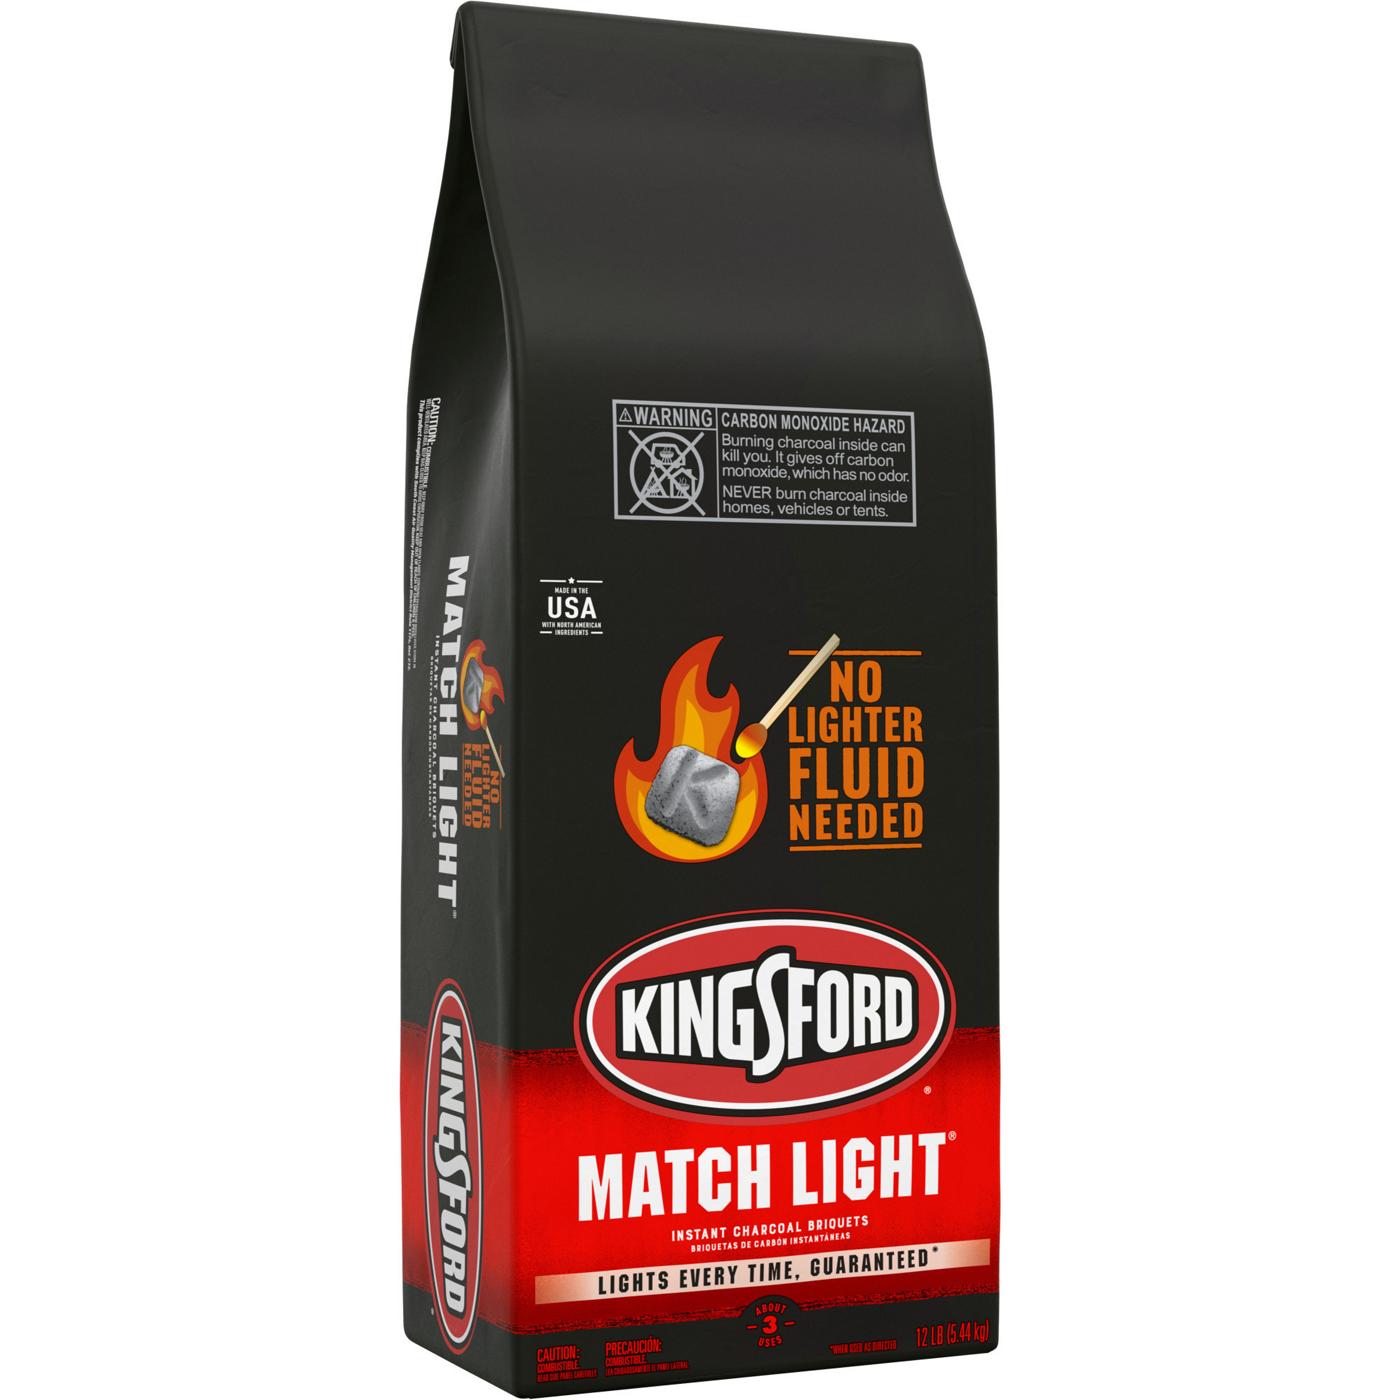 Kingsford Match Light Instant Charcoal Briquettes, BBQ Charcoal for Grilling; image 8 of 11